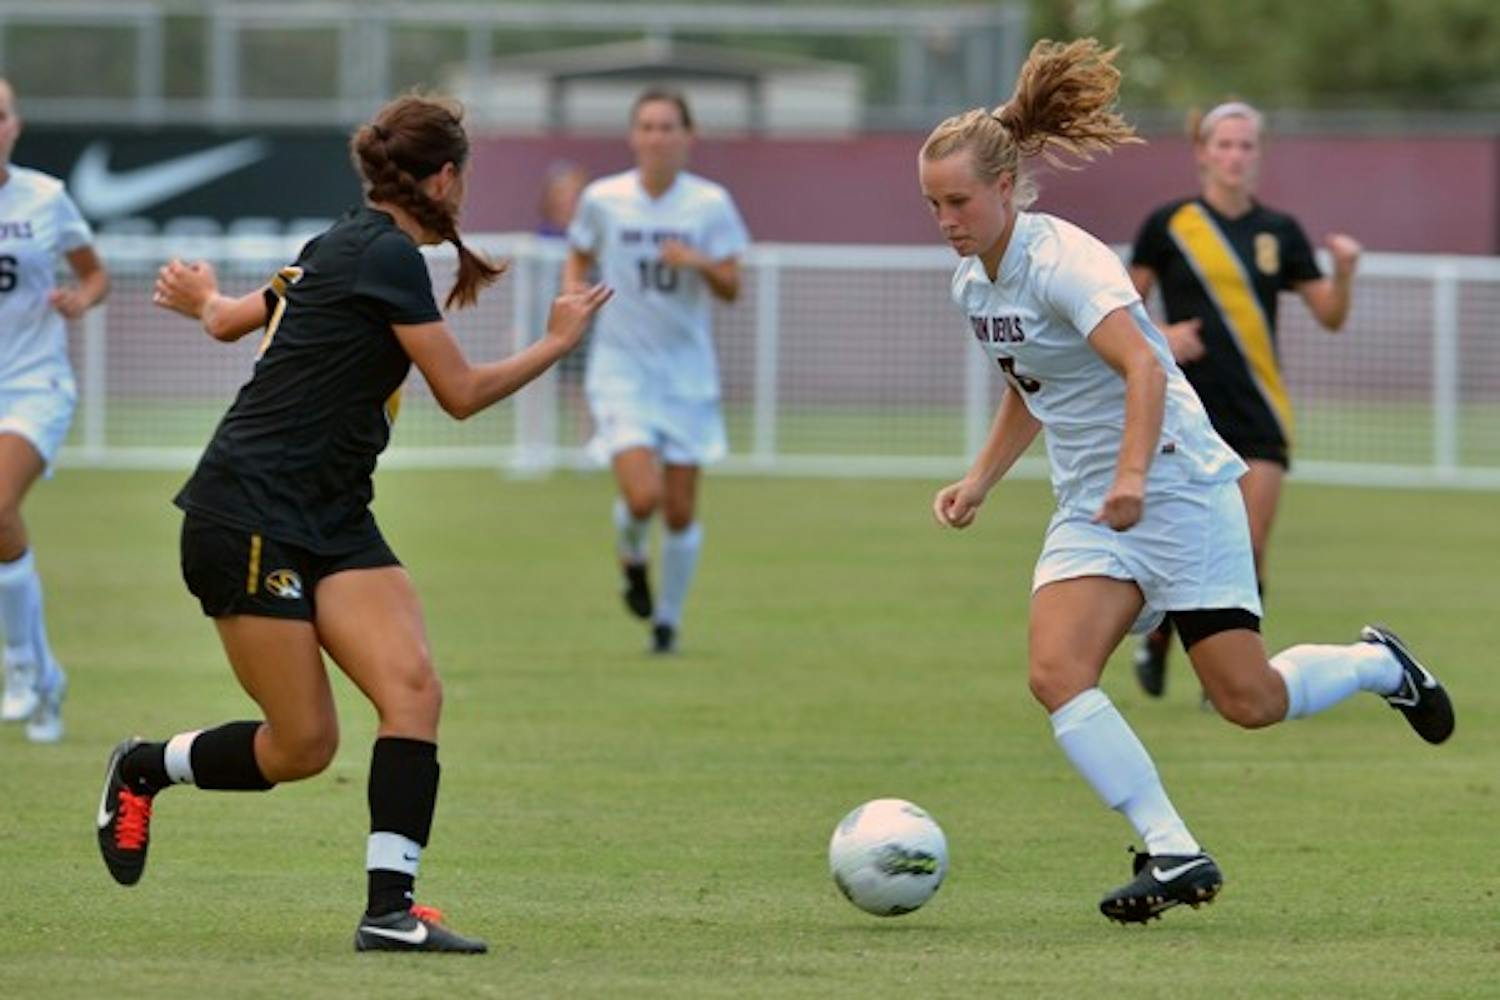 DOWN THE MIDDLE: Sophomore midfielder Taylor McCarter dribbles between two Washington defenders during Sunday's game. Despite a 1-0 loss, ASU coach Kevin Boyd said the team played its best possession game all year. (Photo Courtesy of Steve Rodriguez)